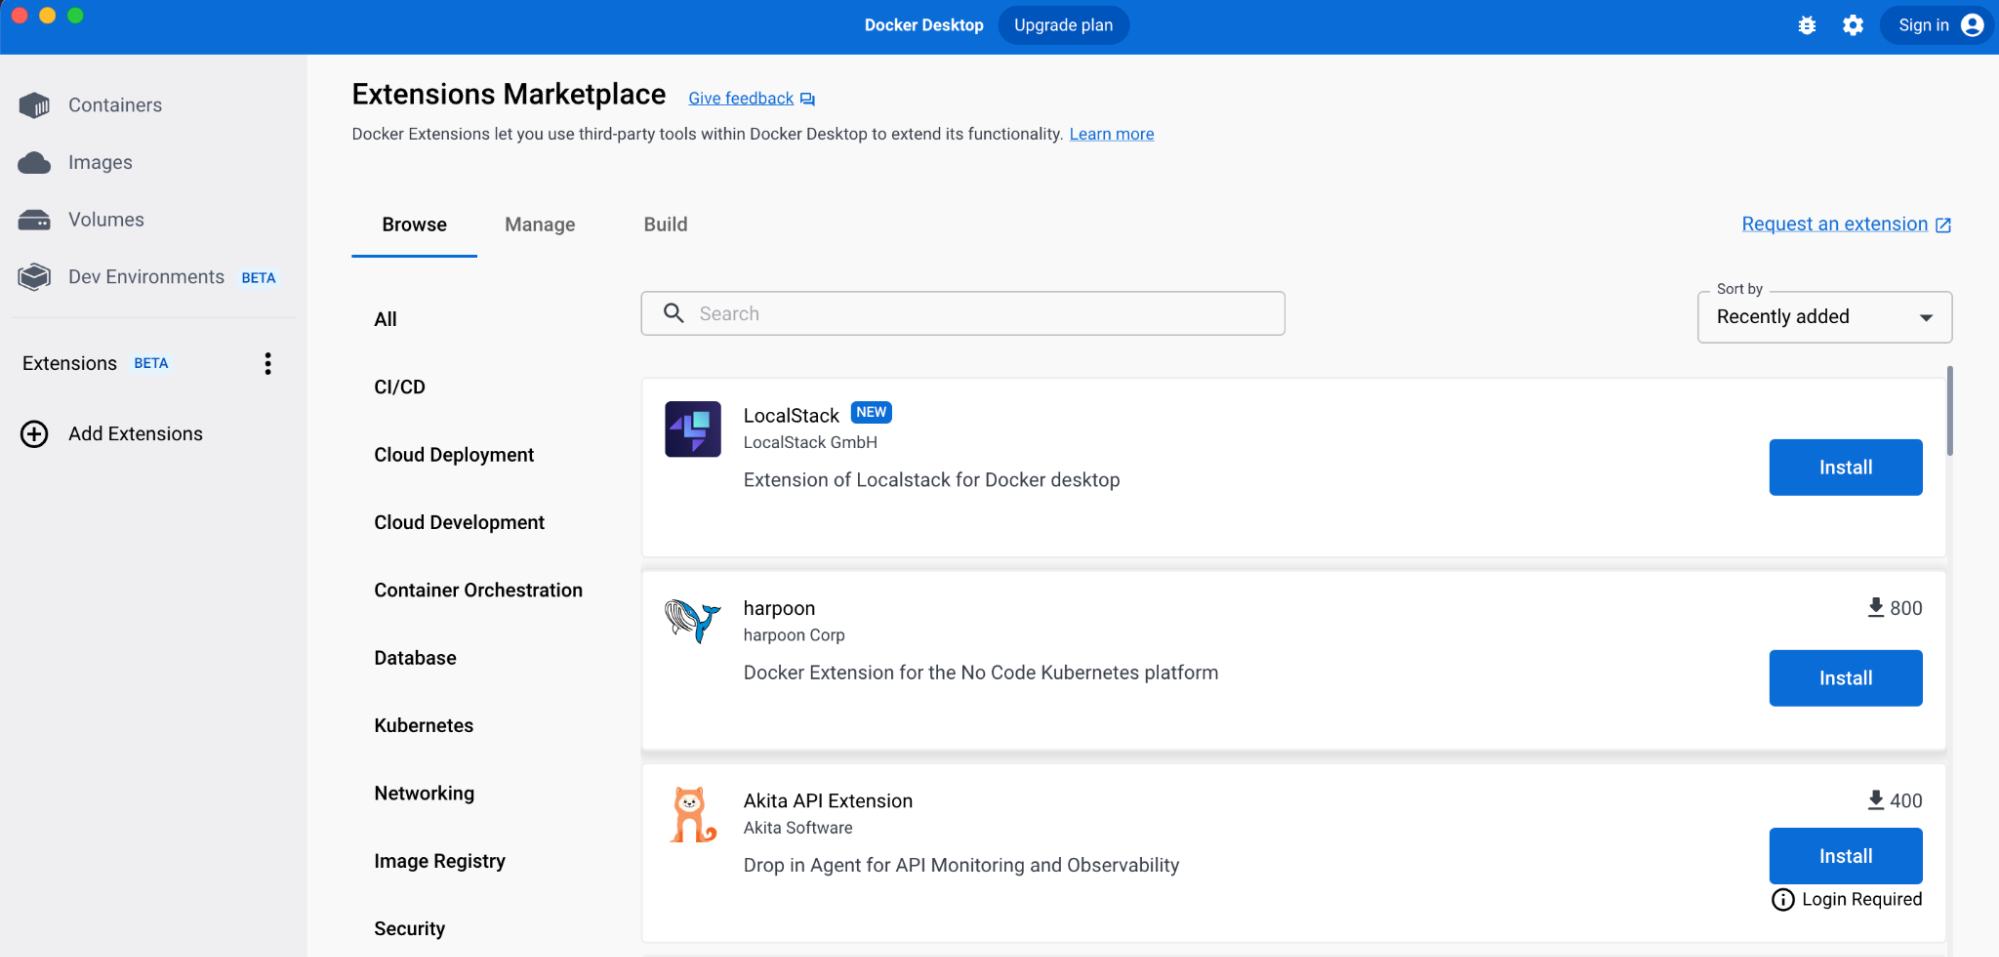 Search the extensions marketplace on docker desktop for localstack.